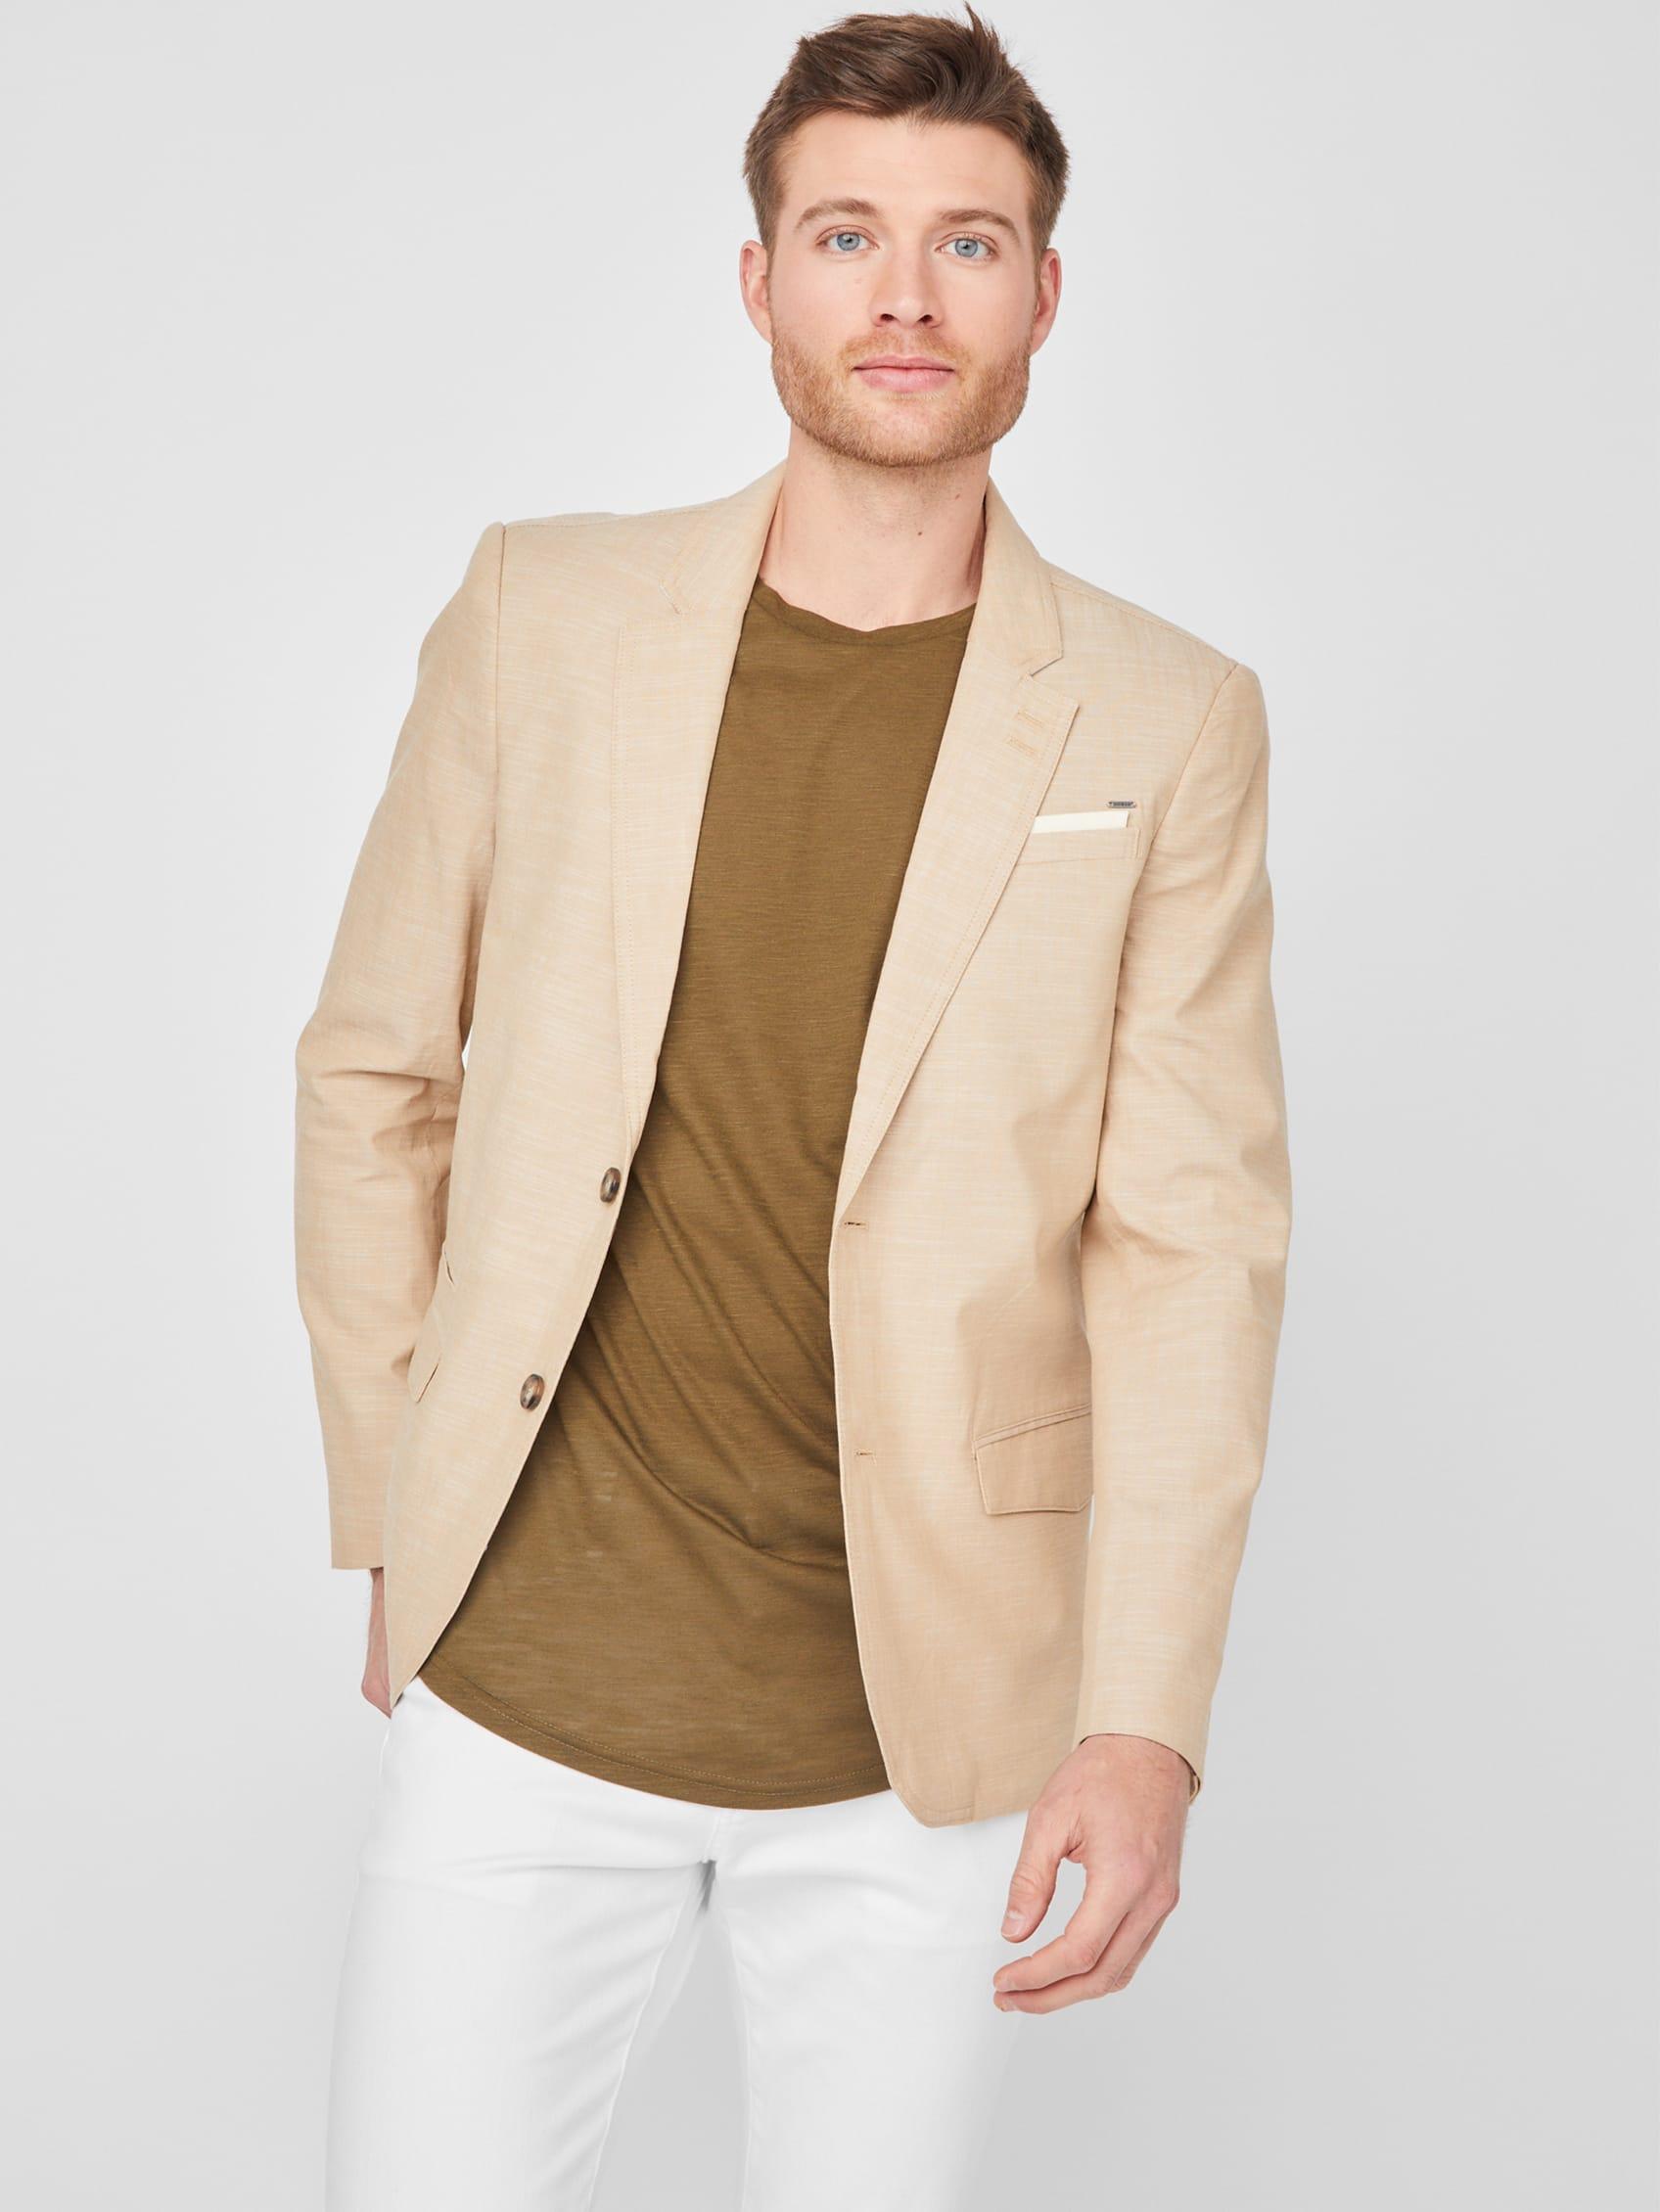 Guess Factory Sanders Chambray Blazer in Natural for Men | Lyst